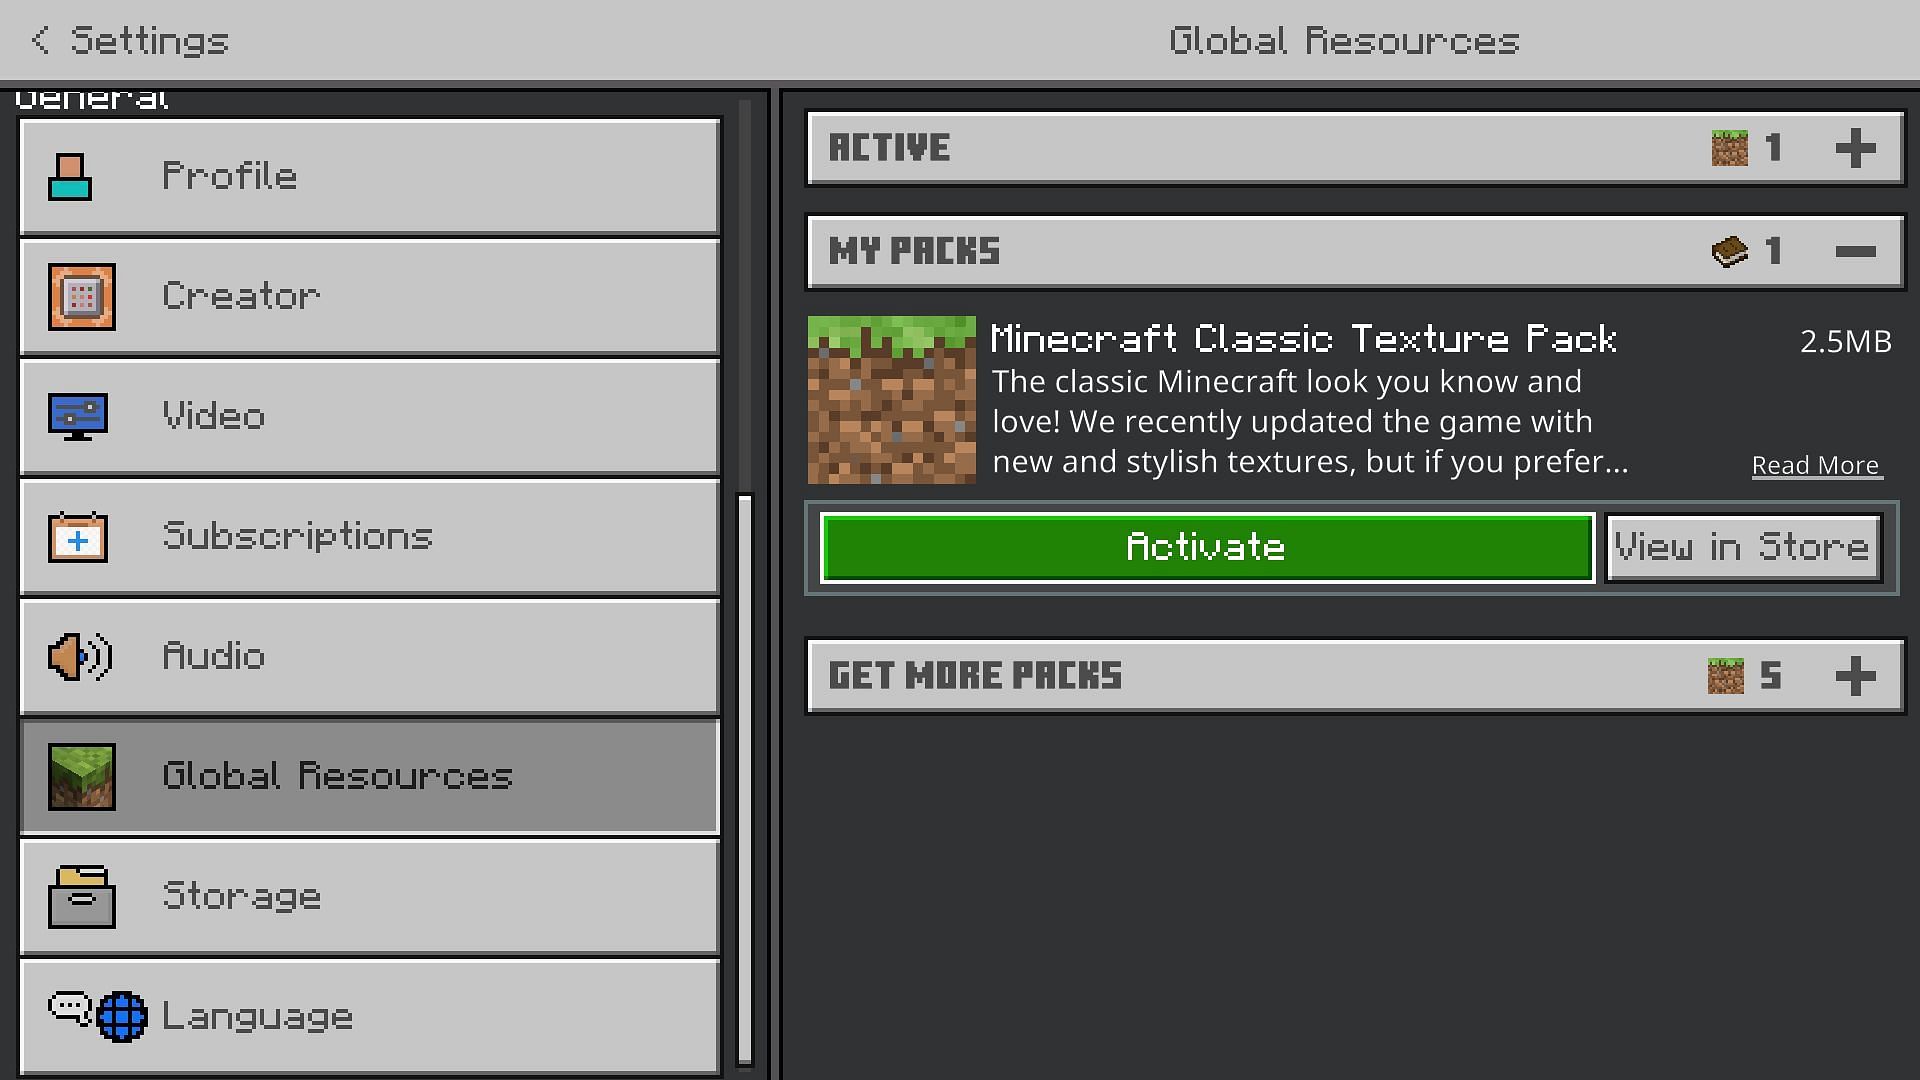 Activate the texture pack from the main settings in Bedrock Edition (Image via Mojang)